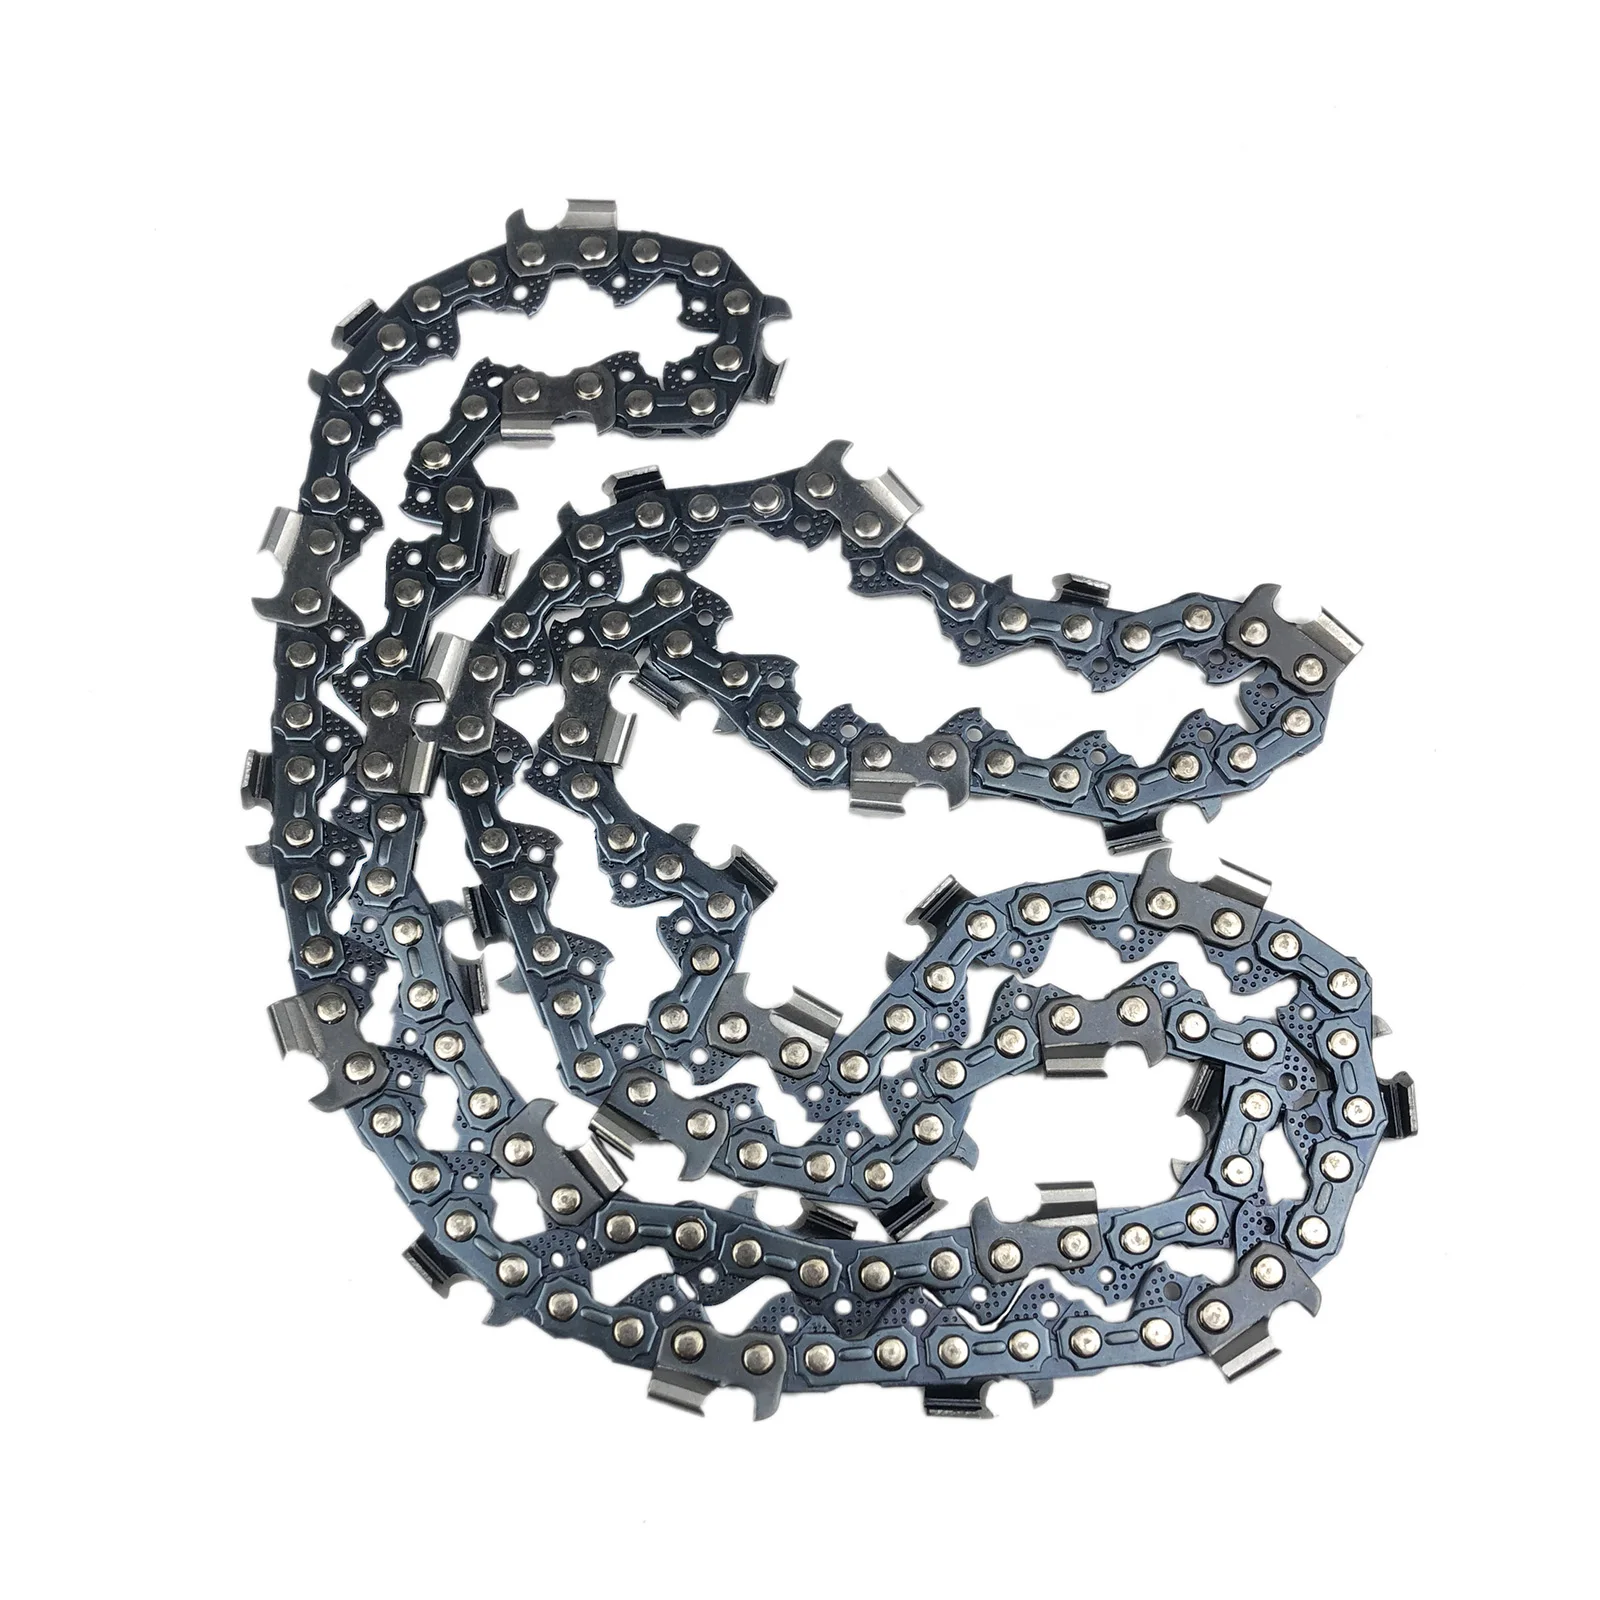 1 pc Chainsaw Chain 72 Drive Link Semi Chisel  Type Chain Aggressive Teeth for Stihl MS290 MS311 MS390  Carbide